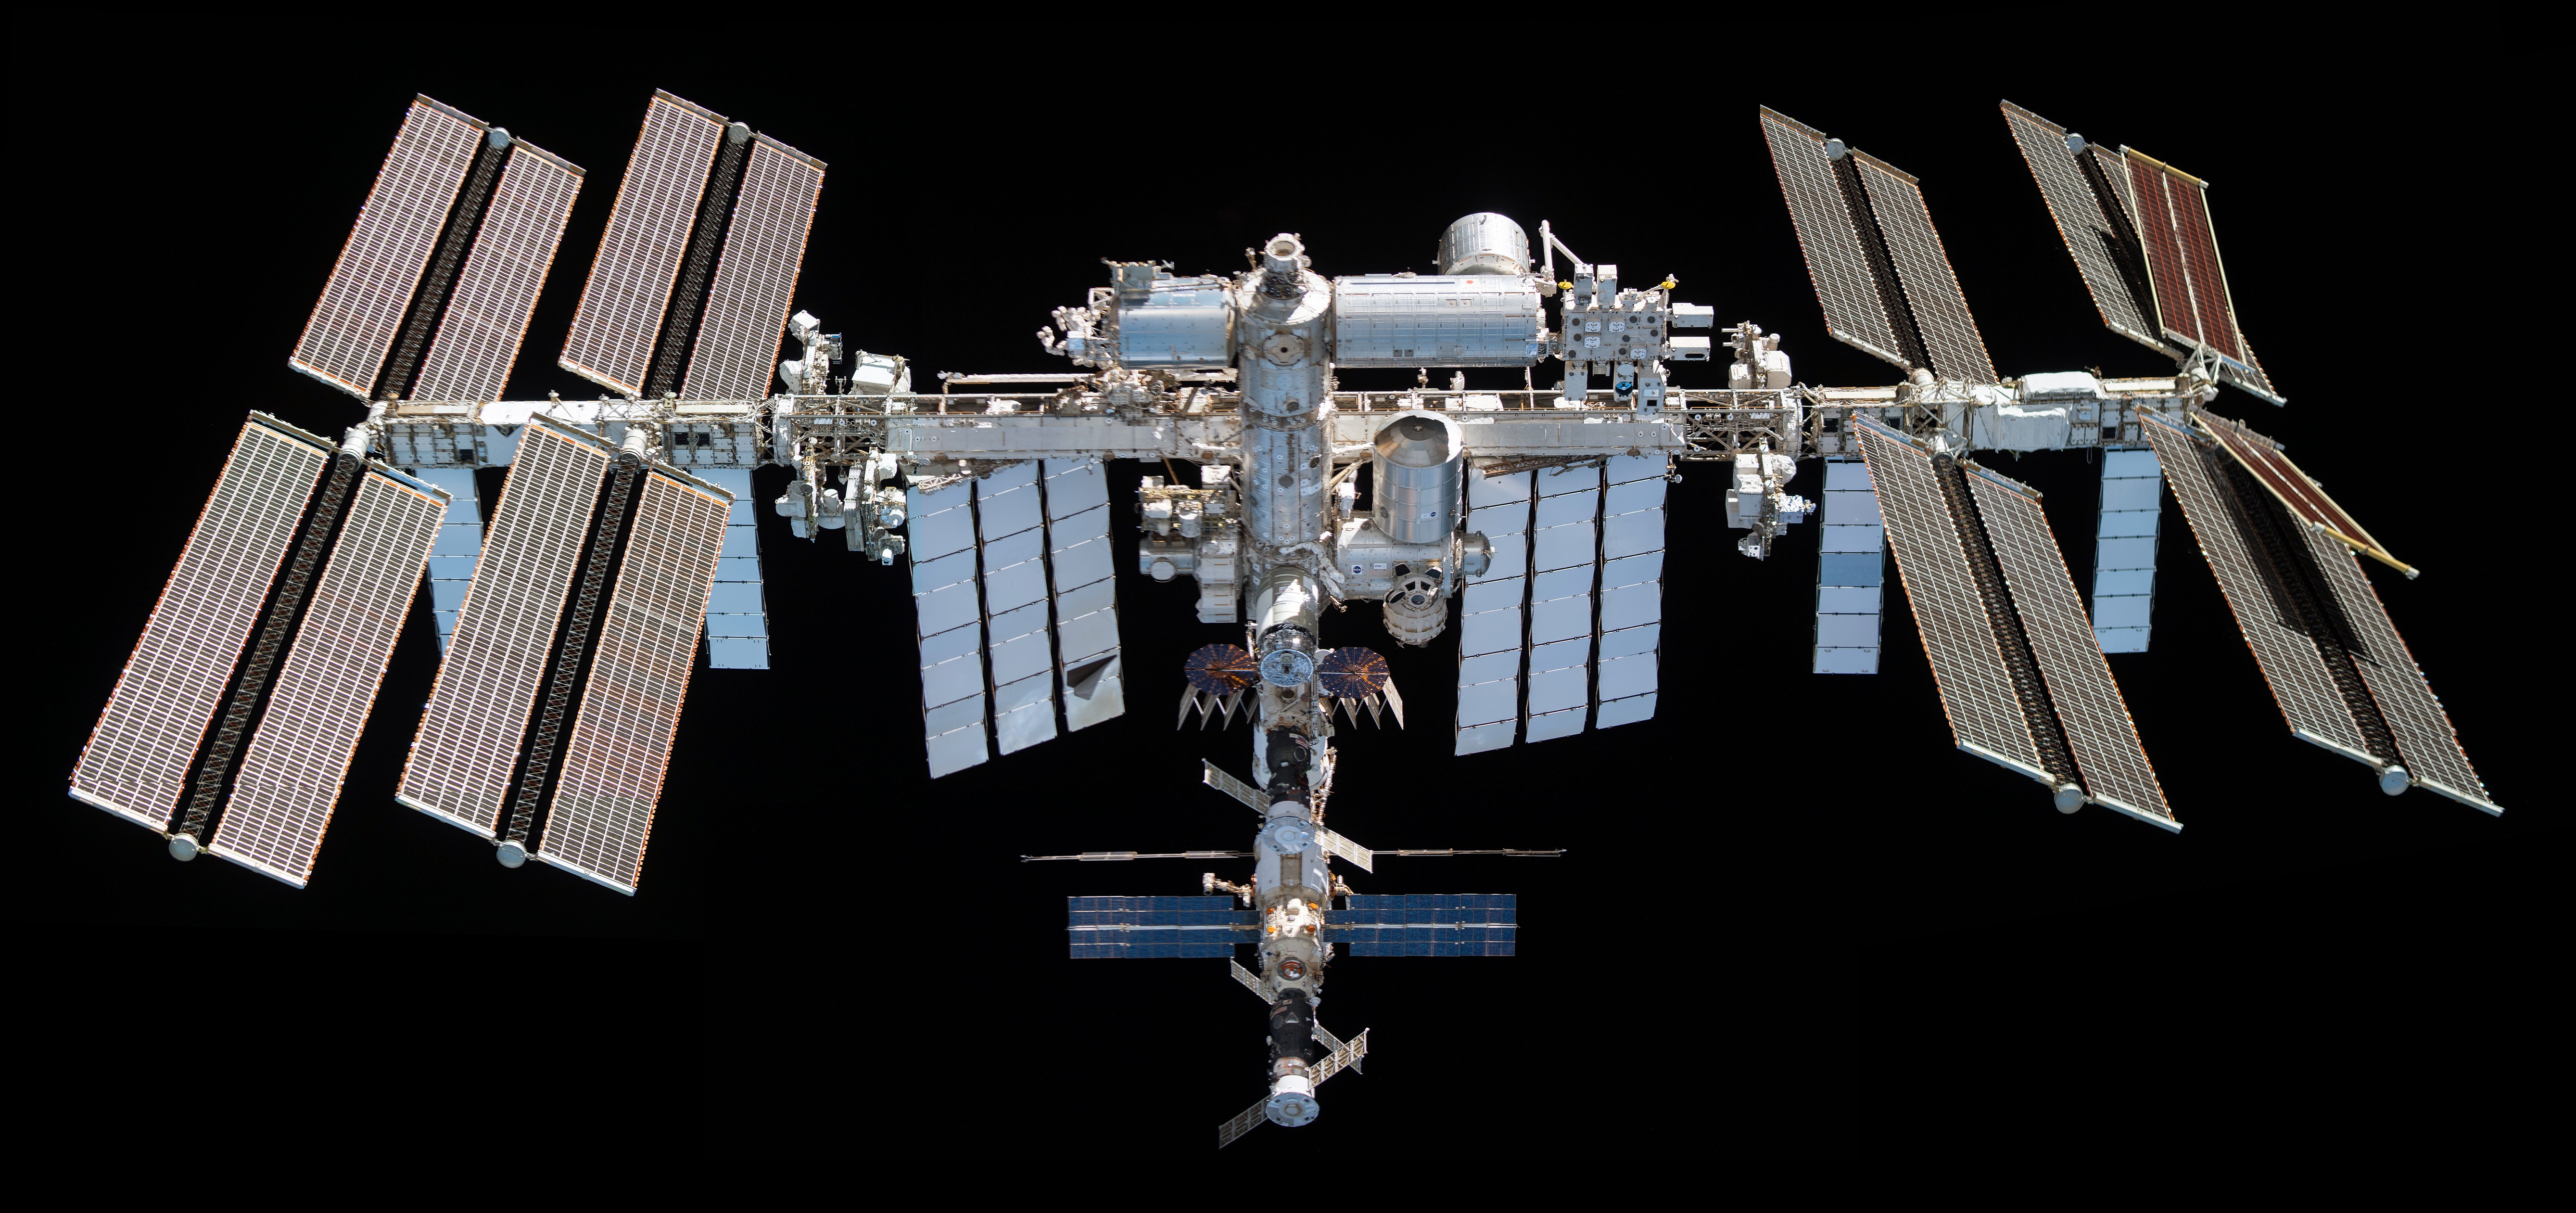 The International Space Station as it appeared in 2021